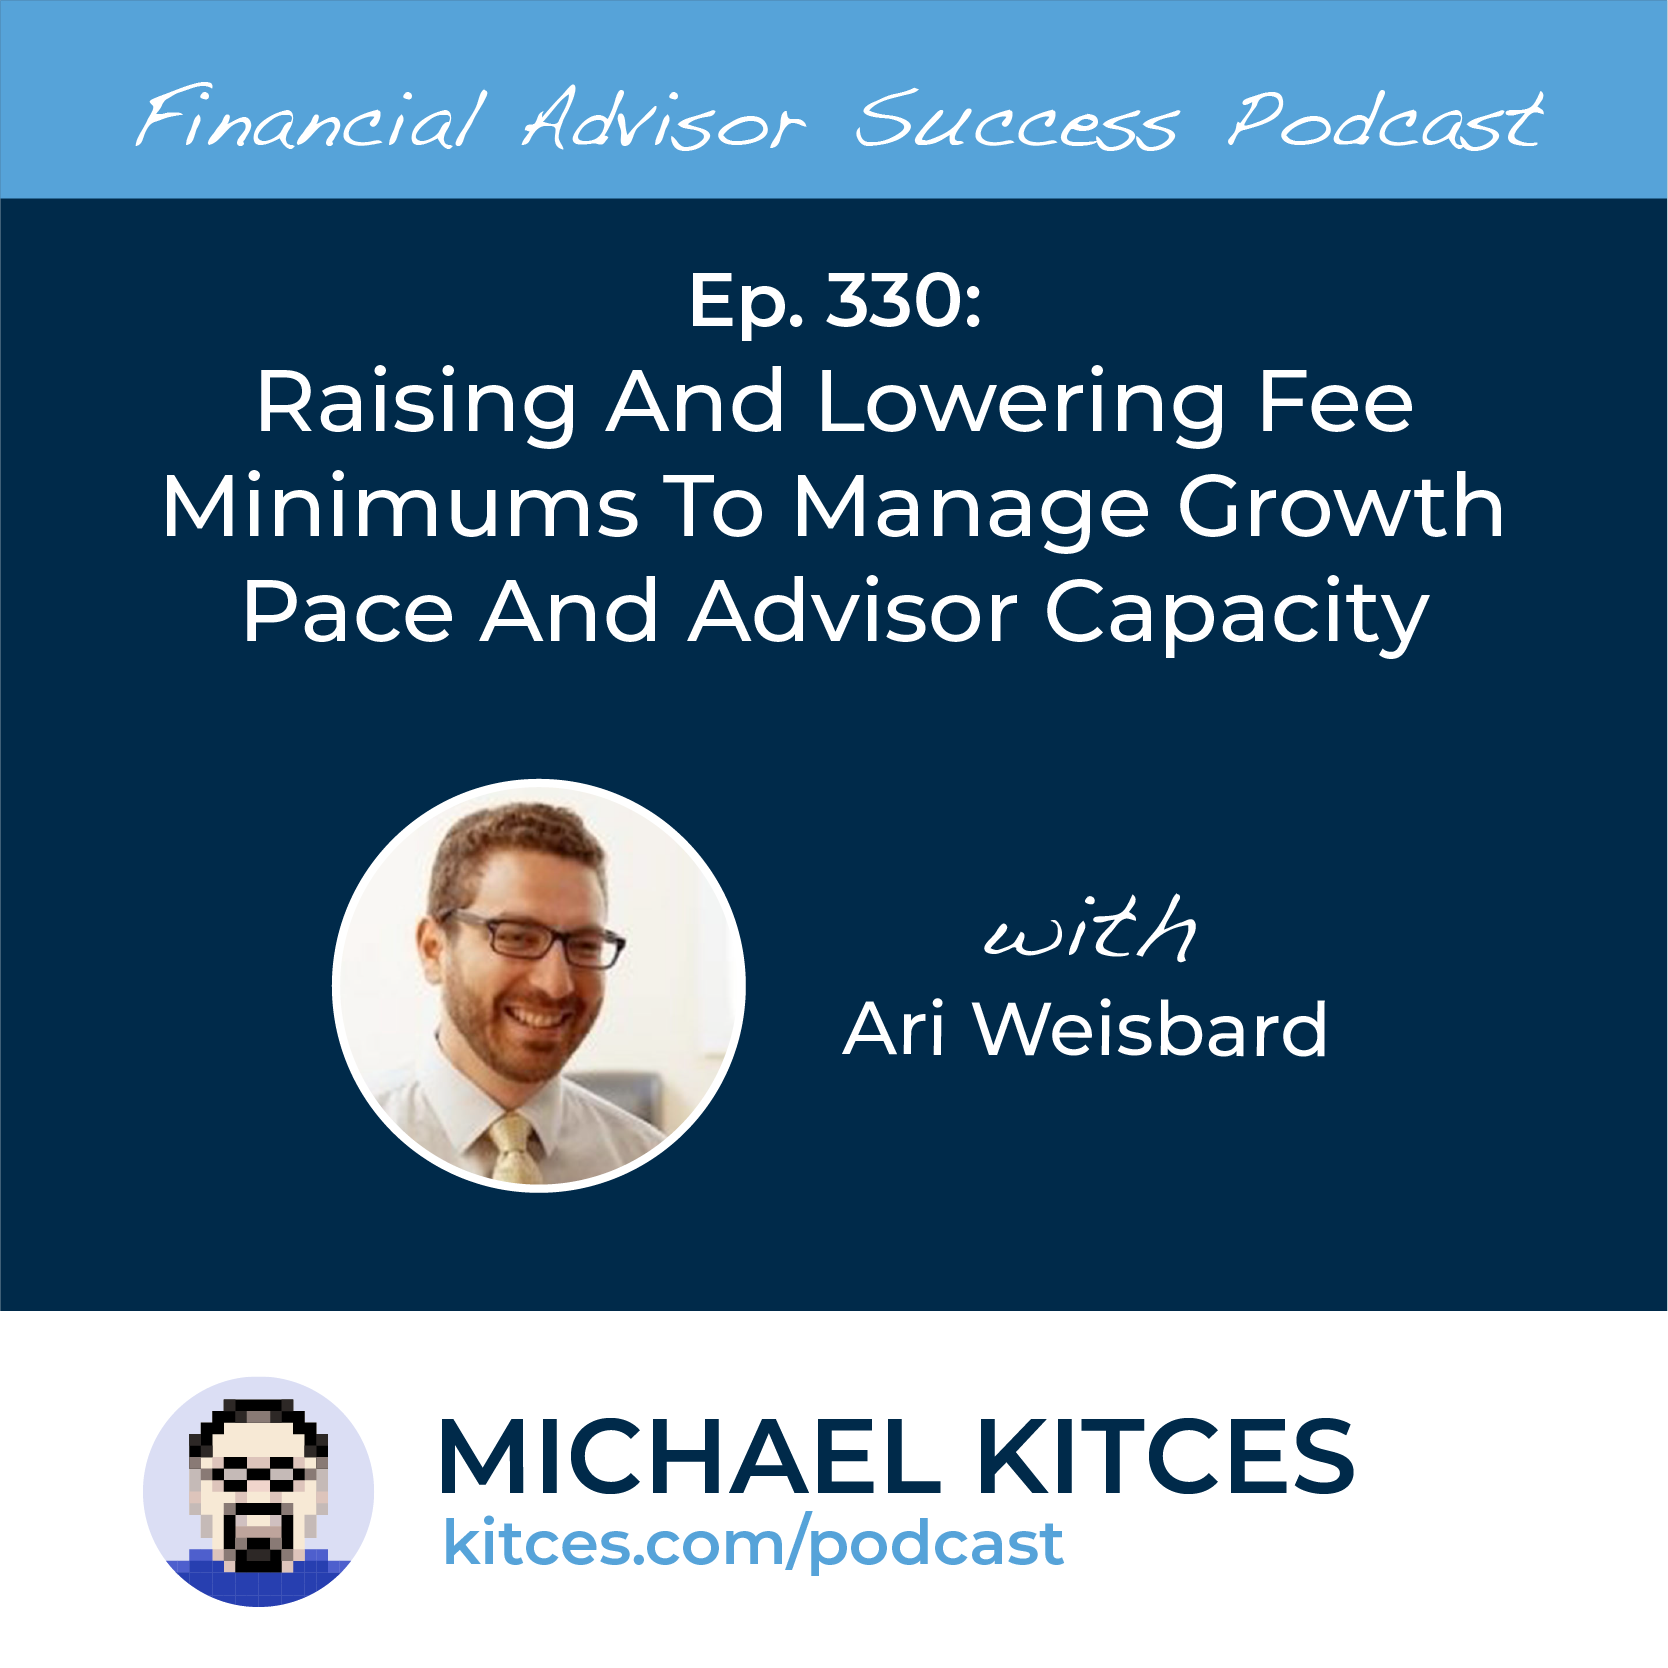 Raising And Lowering Fees To Manage Growth, Advisor Capacity